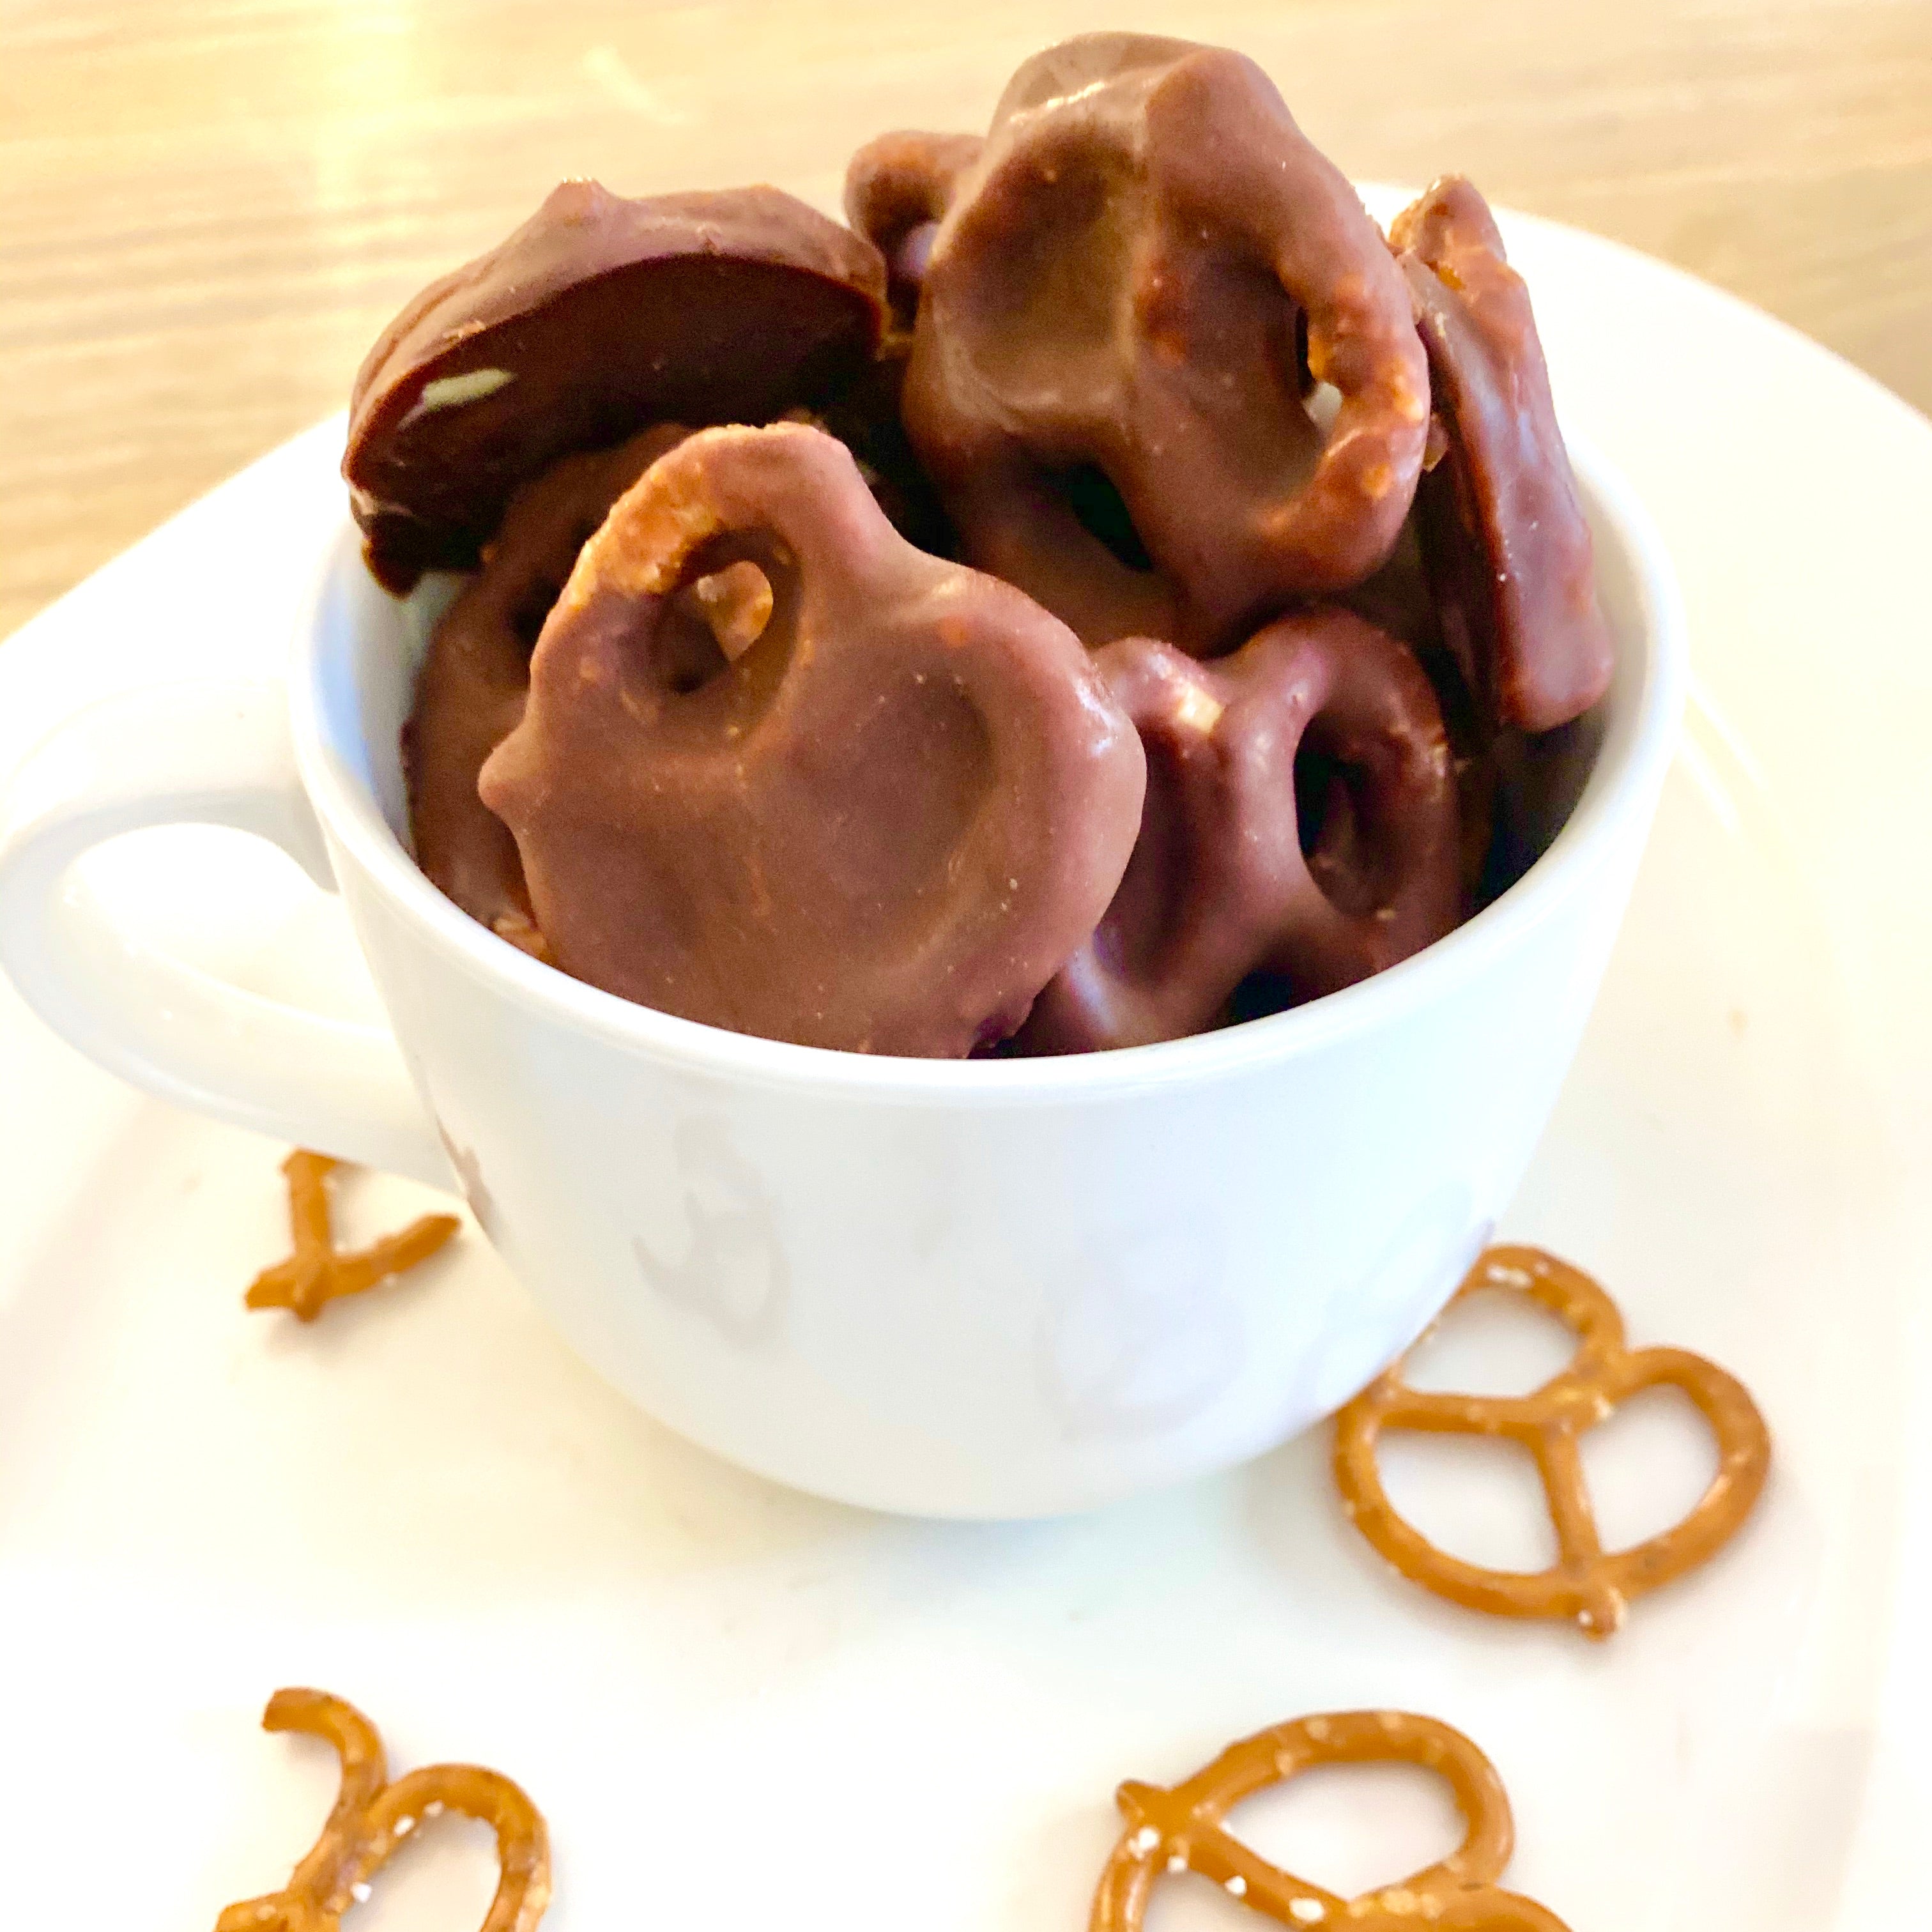 Pretzels covered in Natural Peanut Butter and chocolate, in a mug.